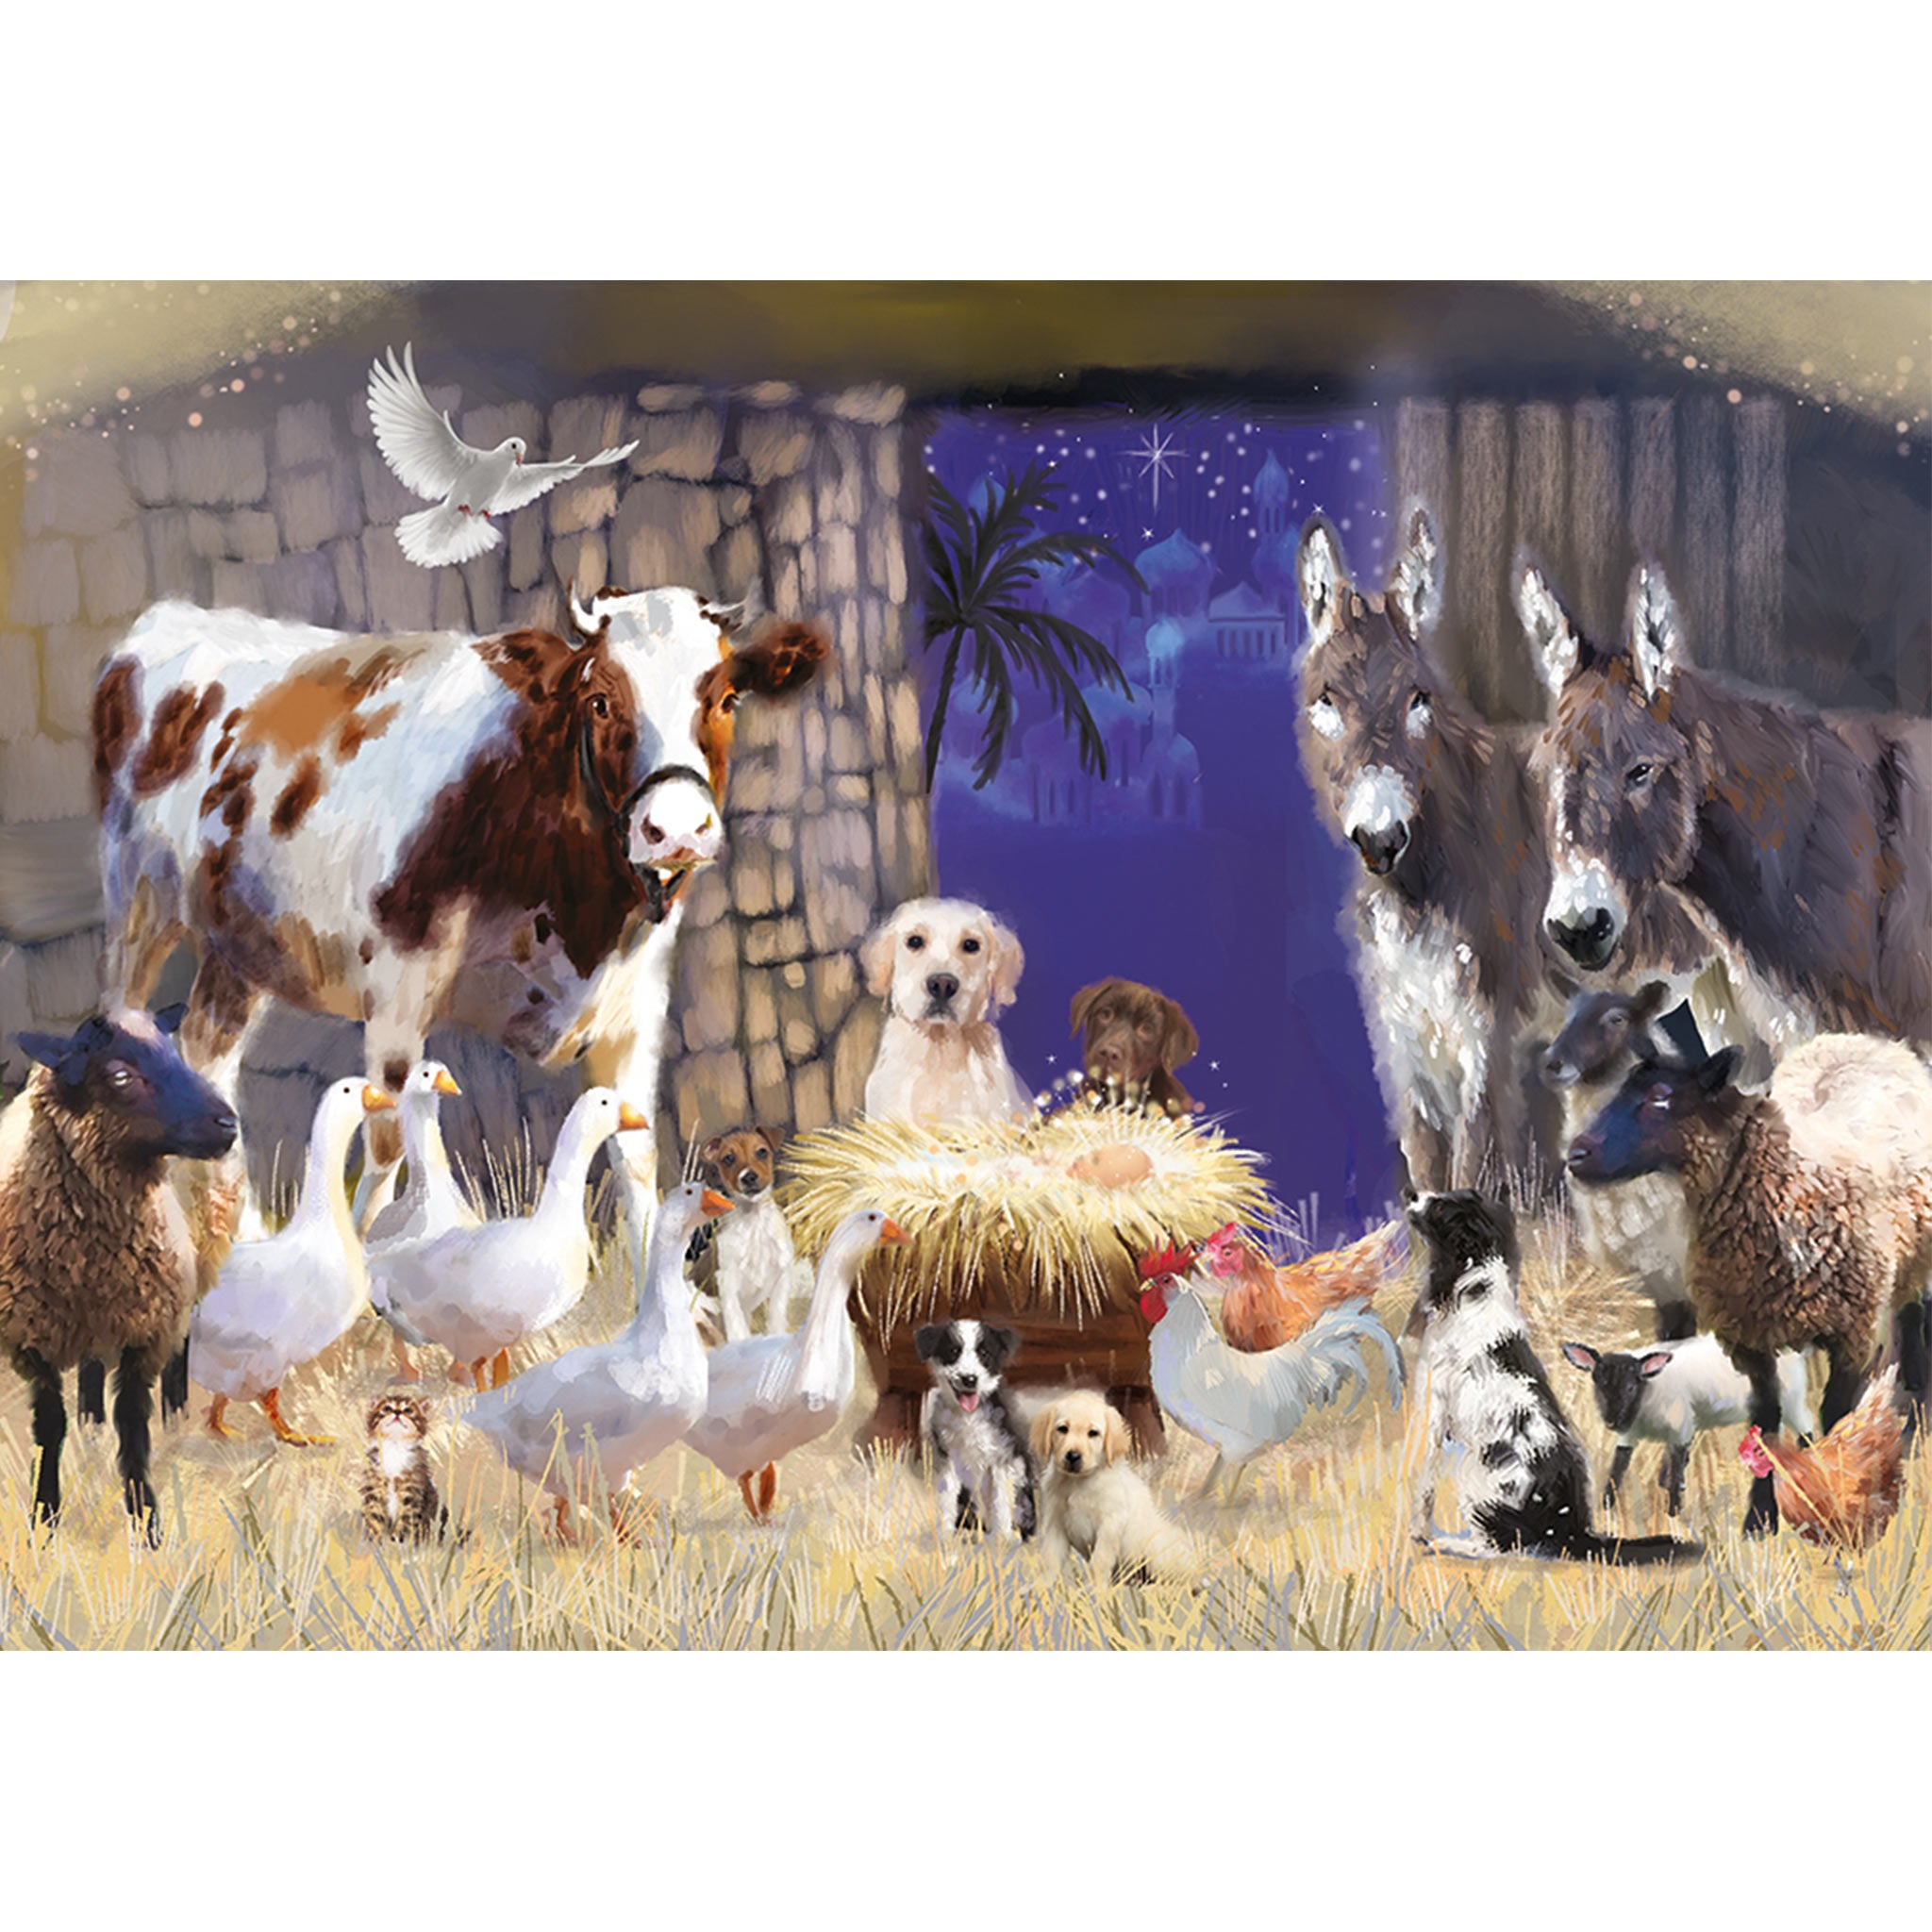 The design on this Christmas card is a collage image of dogs and animals gathered around a manger in a stable.